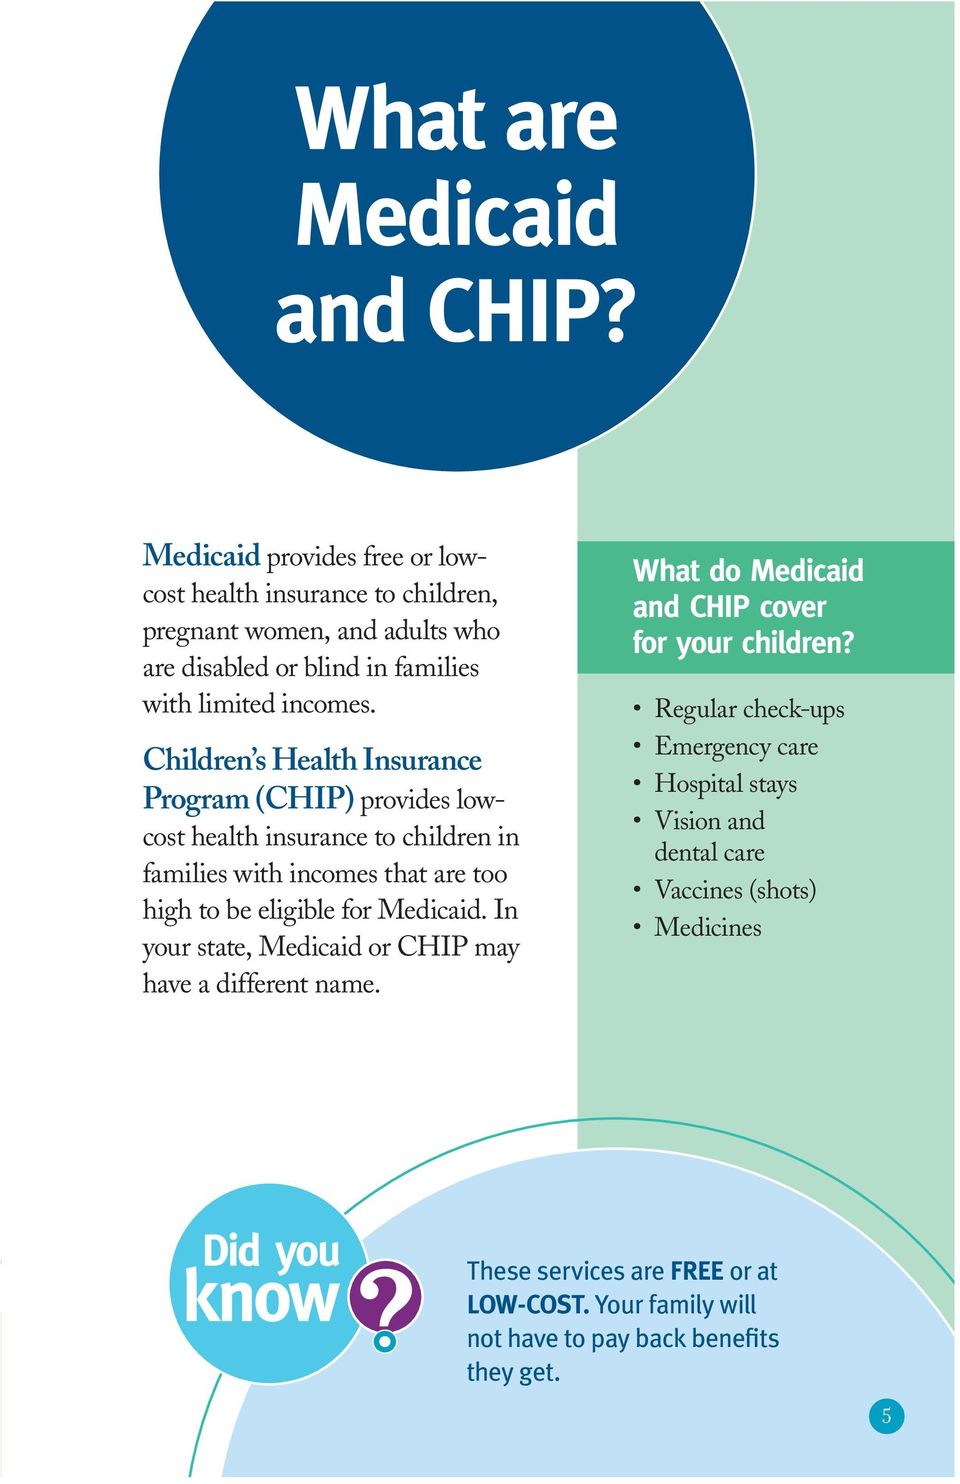 Children s Health Insurance Program (CHIP) provides lowcost health insurance to children in families with incomes that are too high to be eligible for Medicaid.